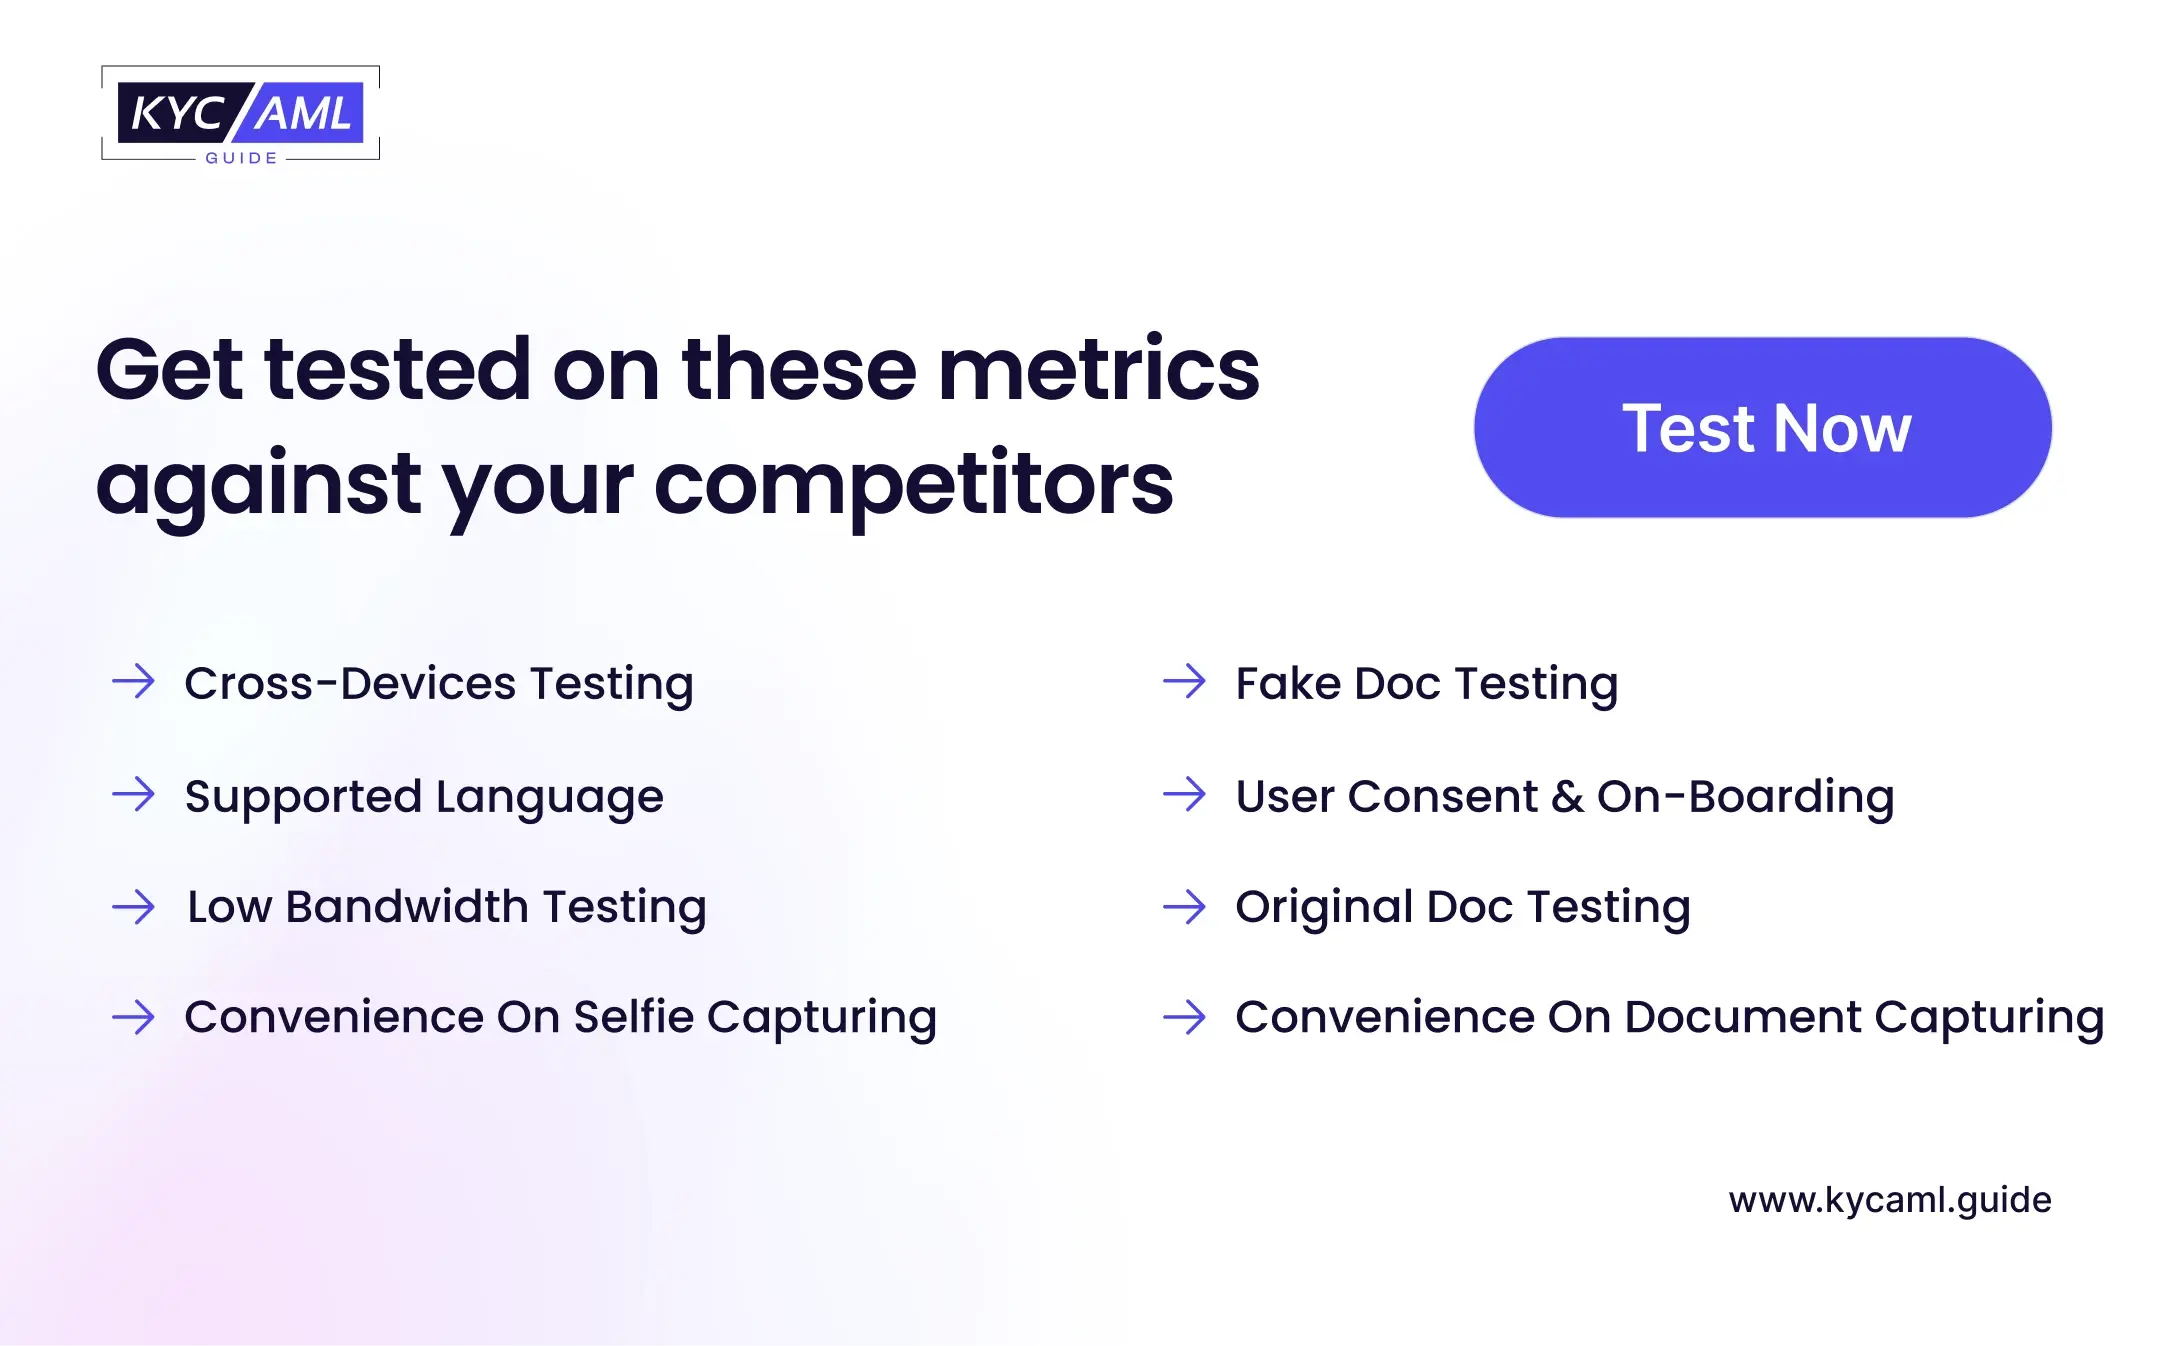 Get tested on these metrics against your competitors